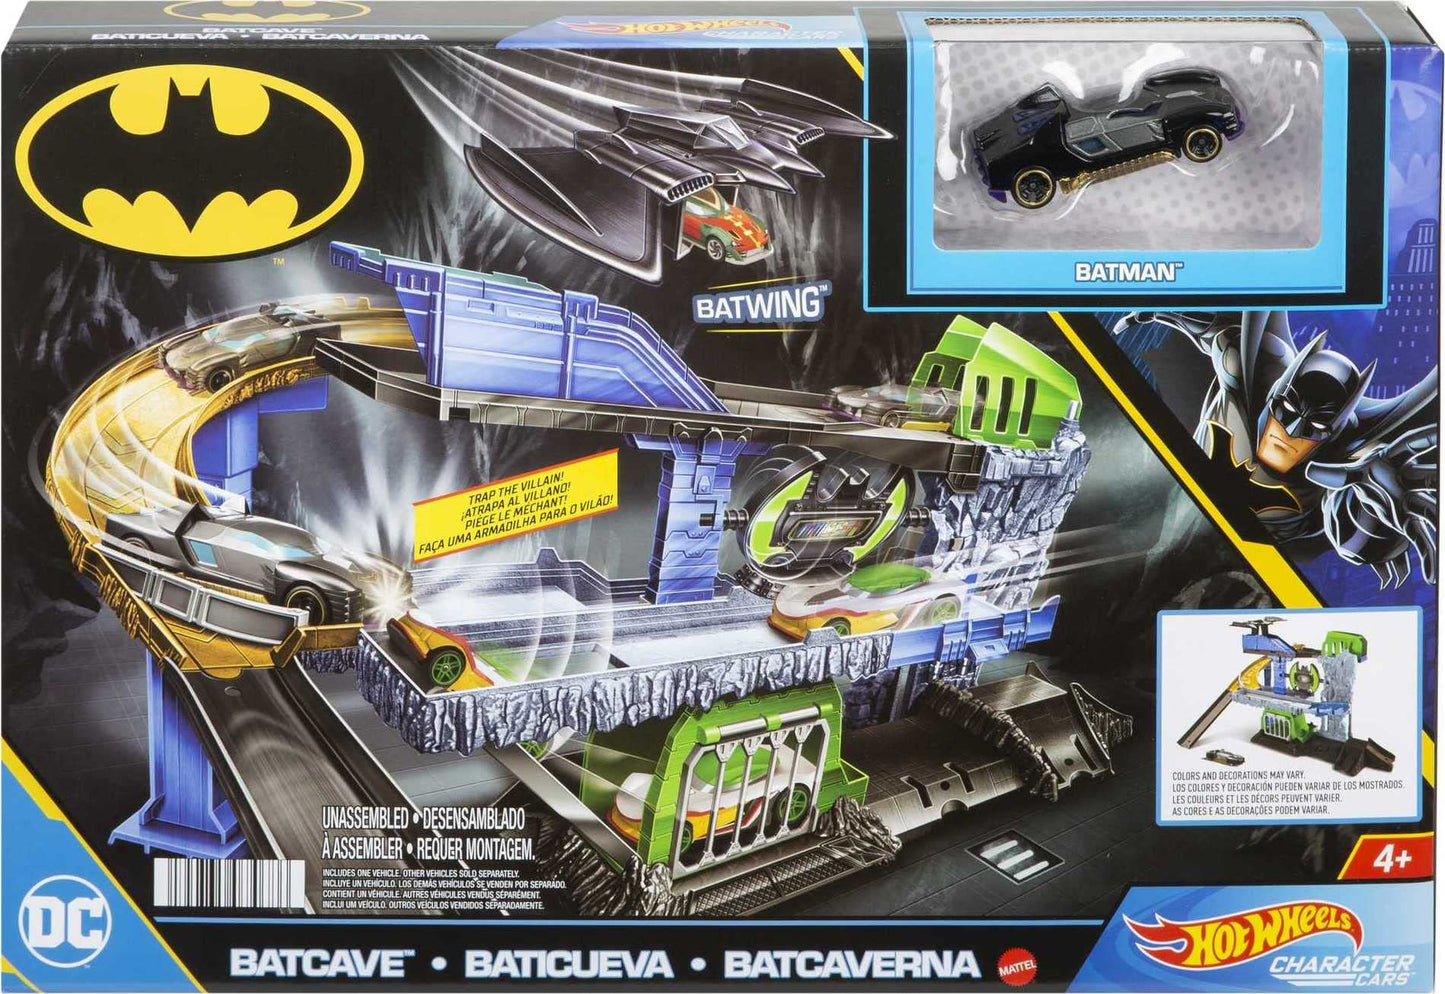 Hot Wheels DC Batcave Playset with Batman Character Car in 1:64 Scale, with Storage